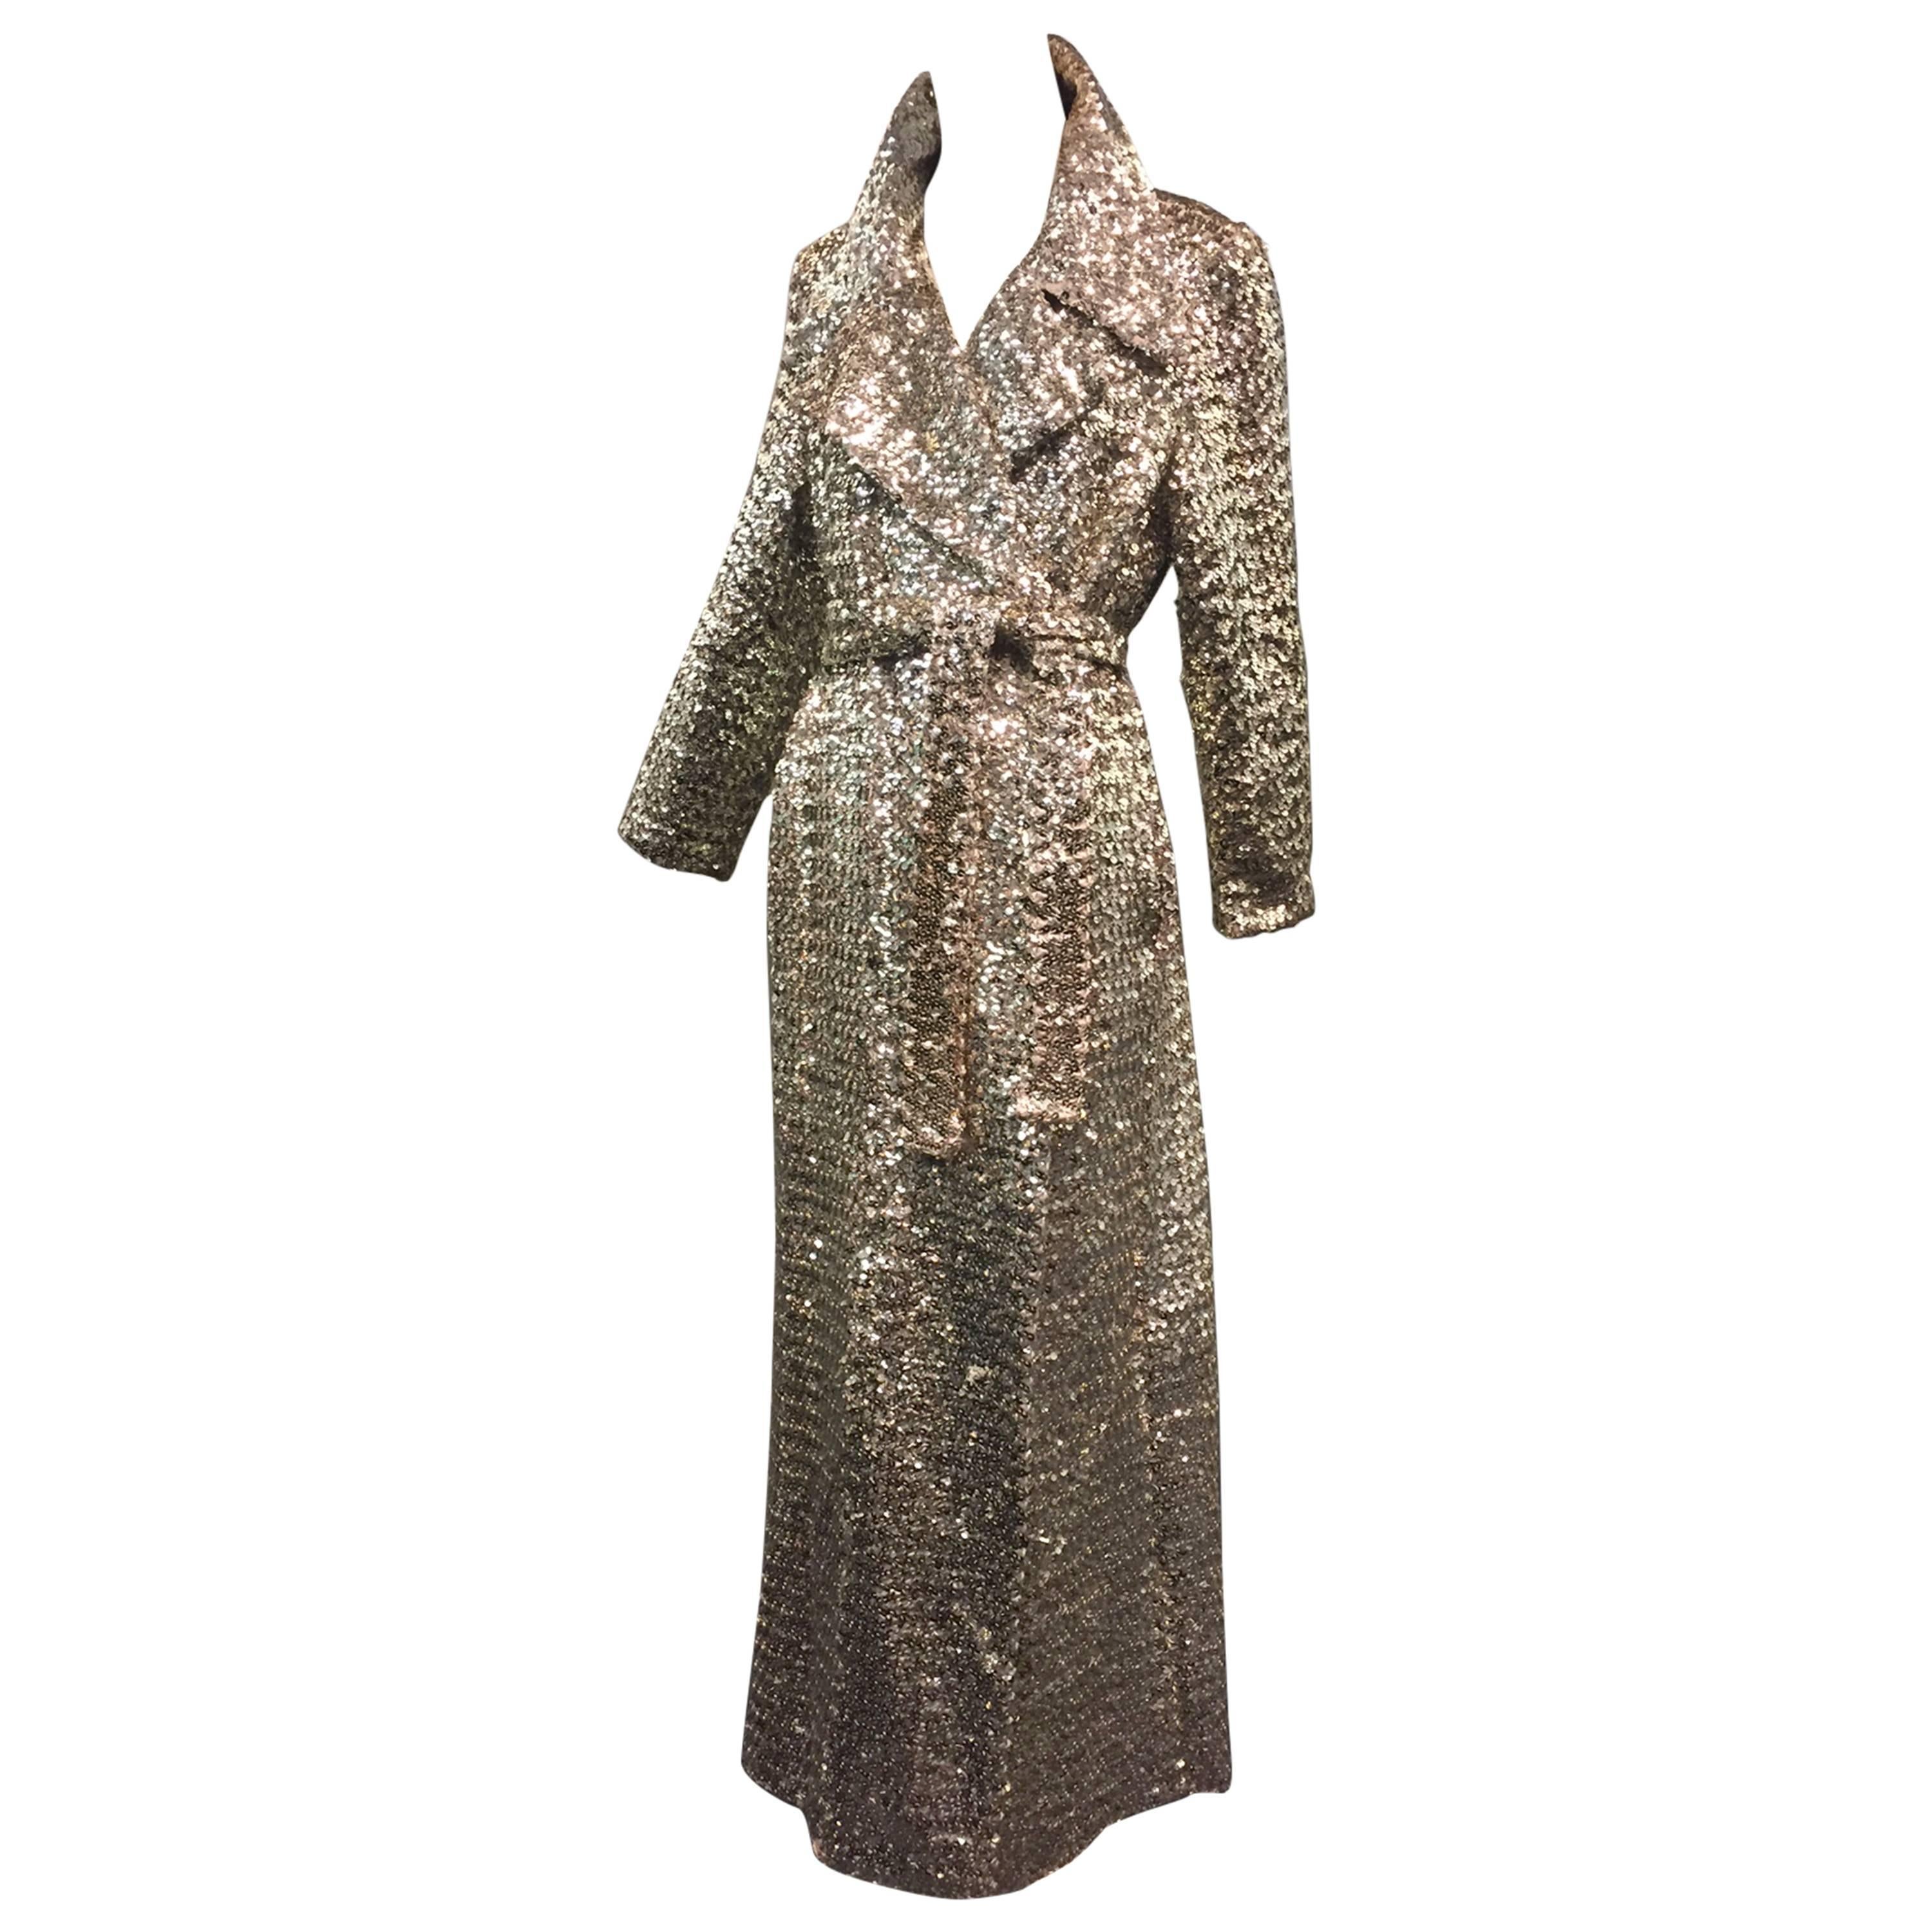 1960s Silver Sequin Trench Coat Maxi Length w/ Belt